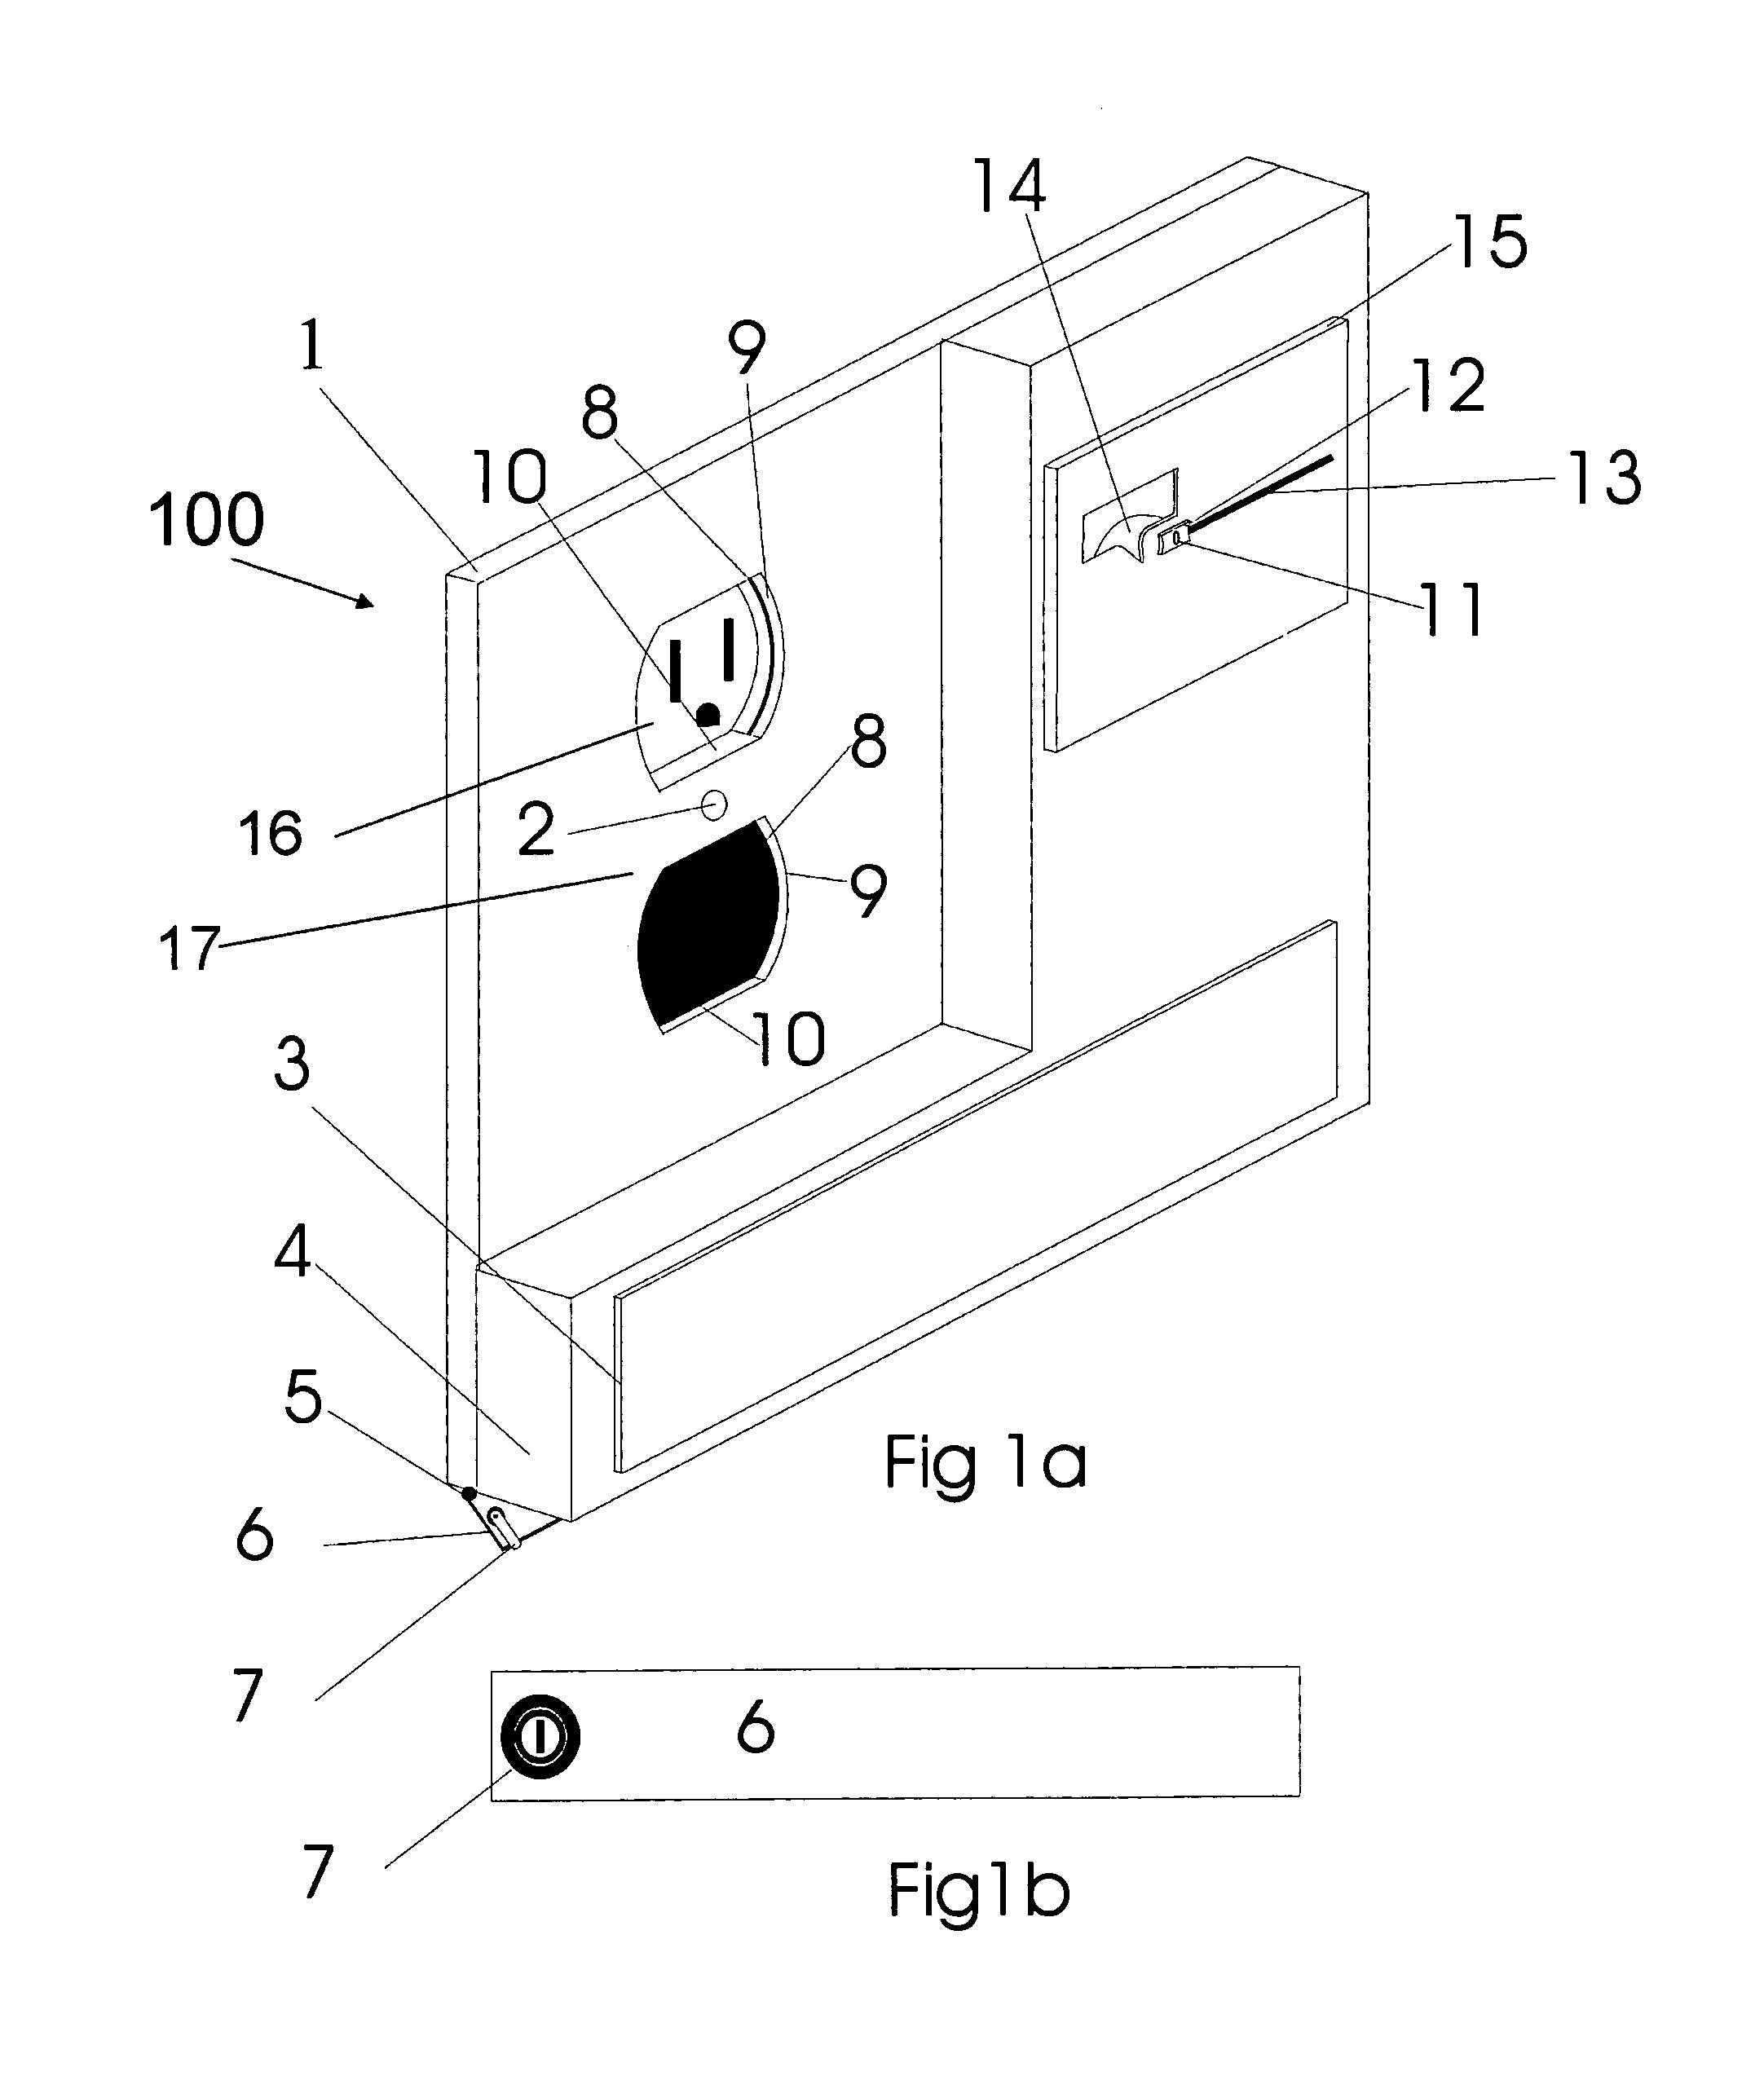 Apparatus for utility outlet control